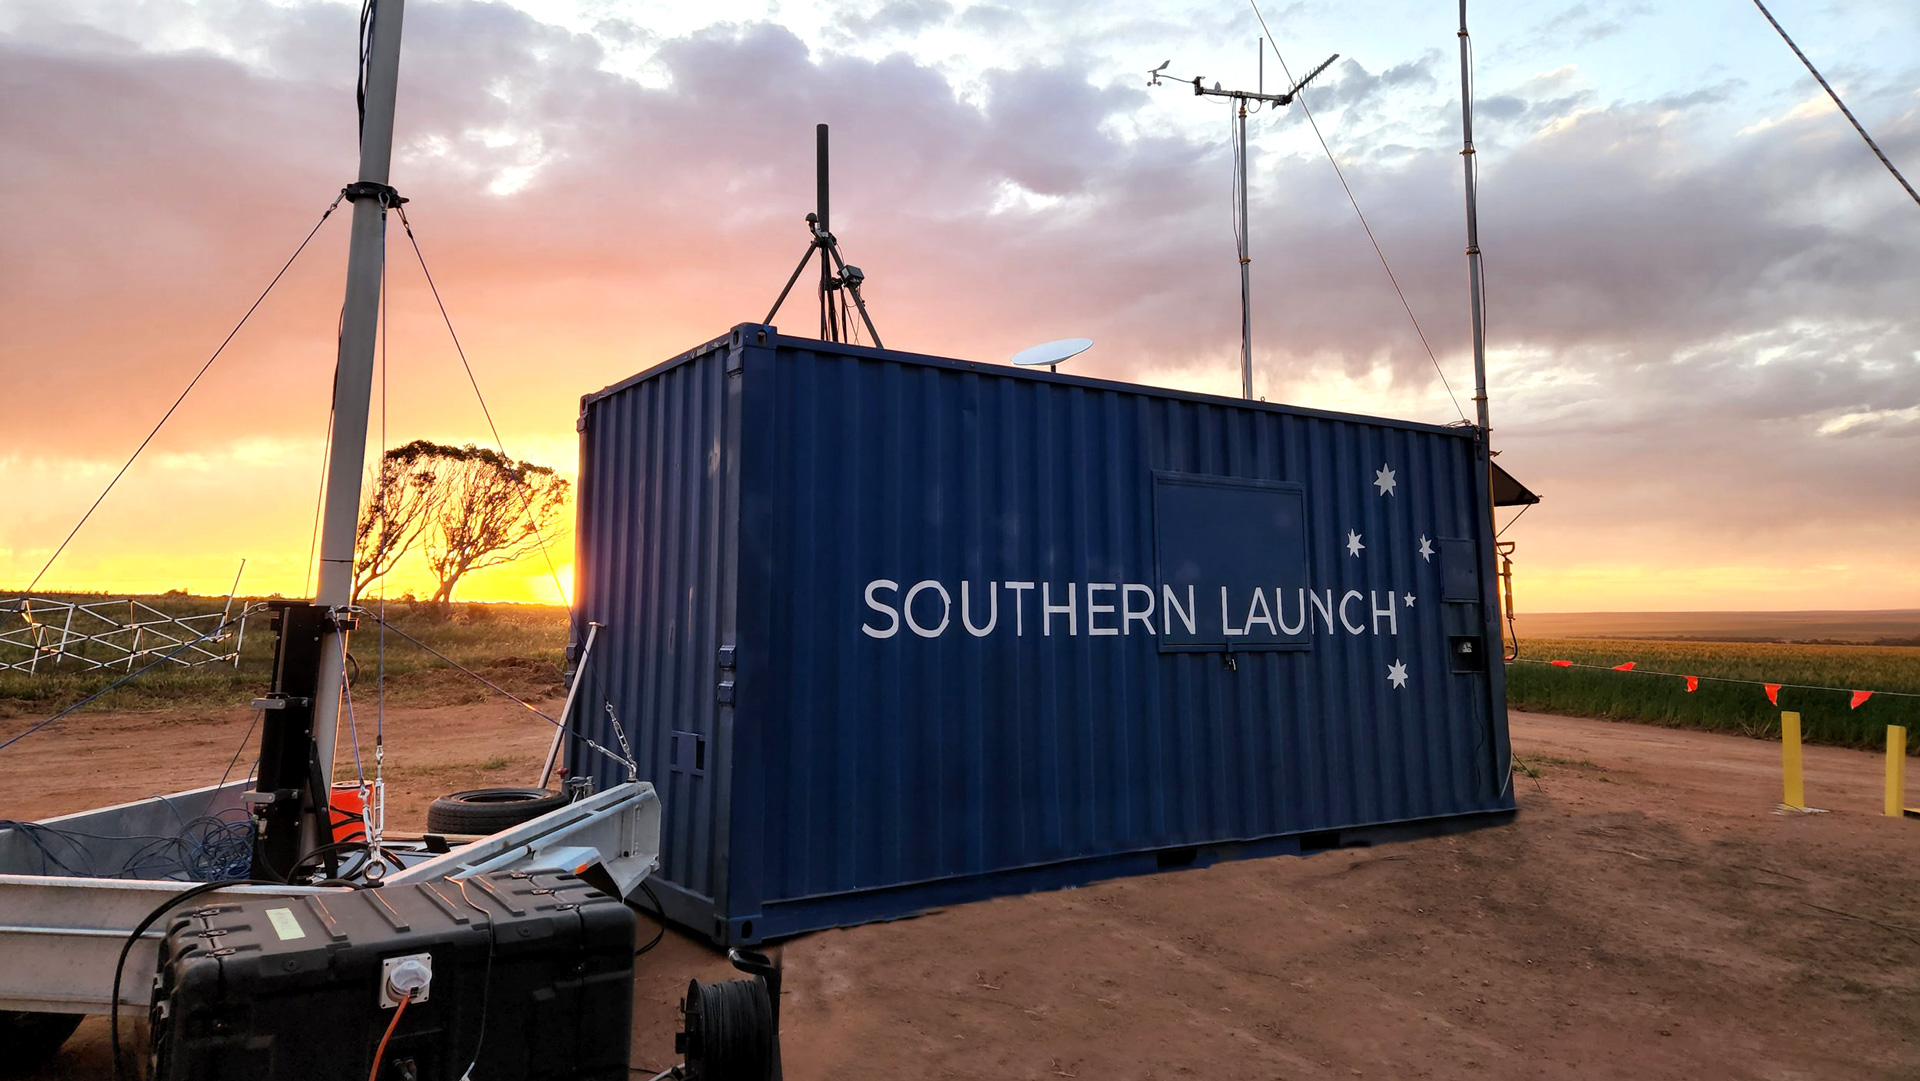 Southern Launch Range Operations at Koonibba Test Range